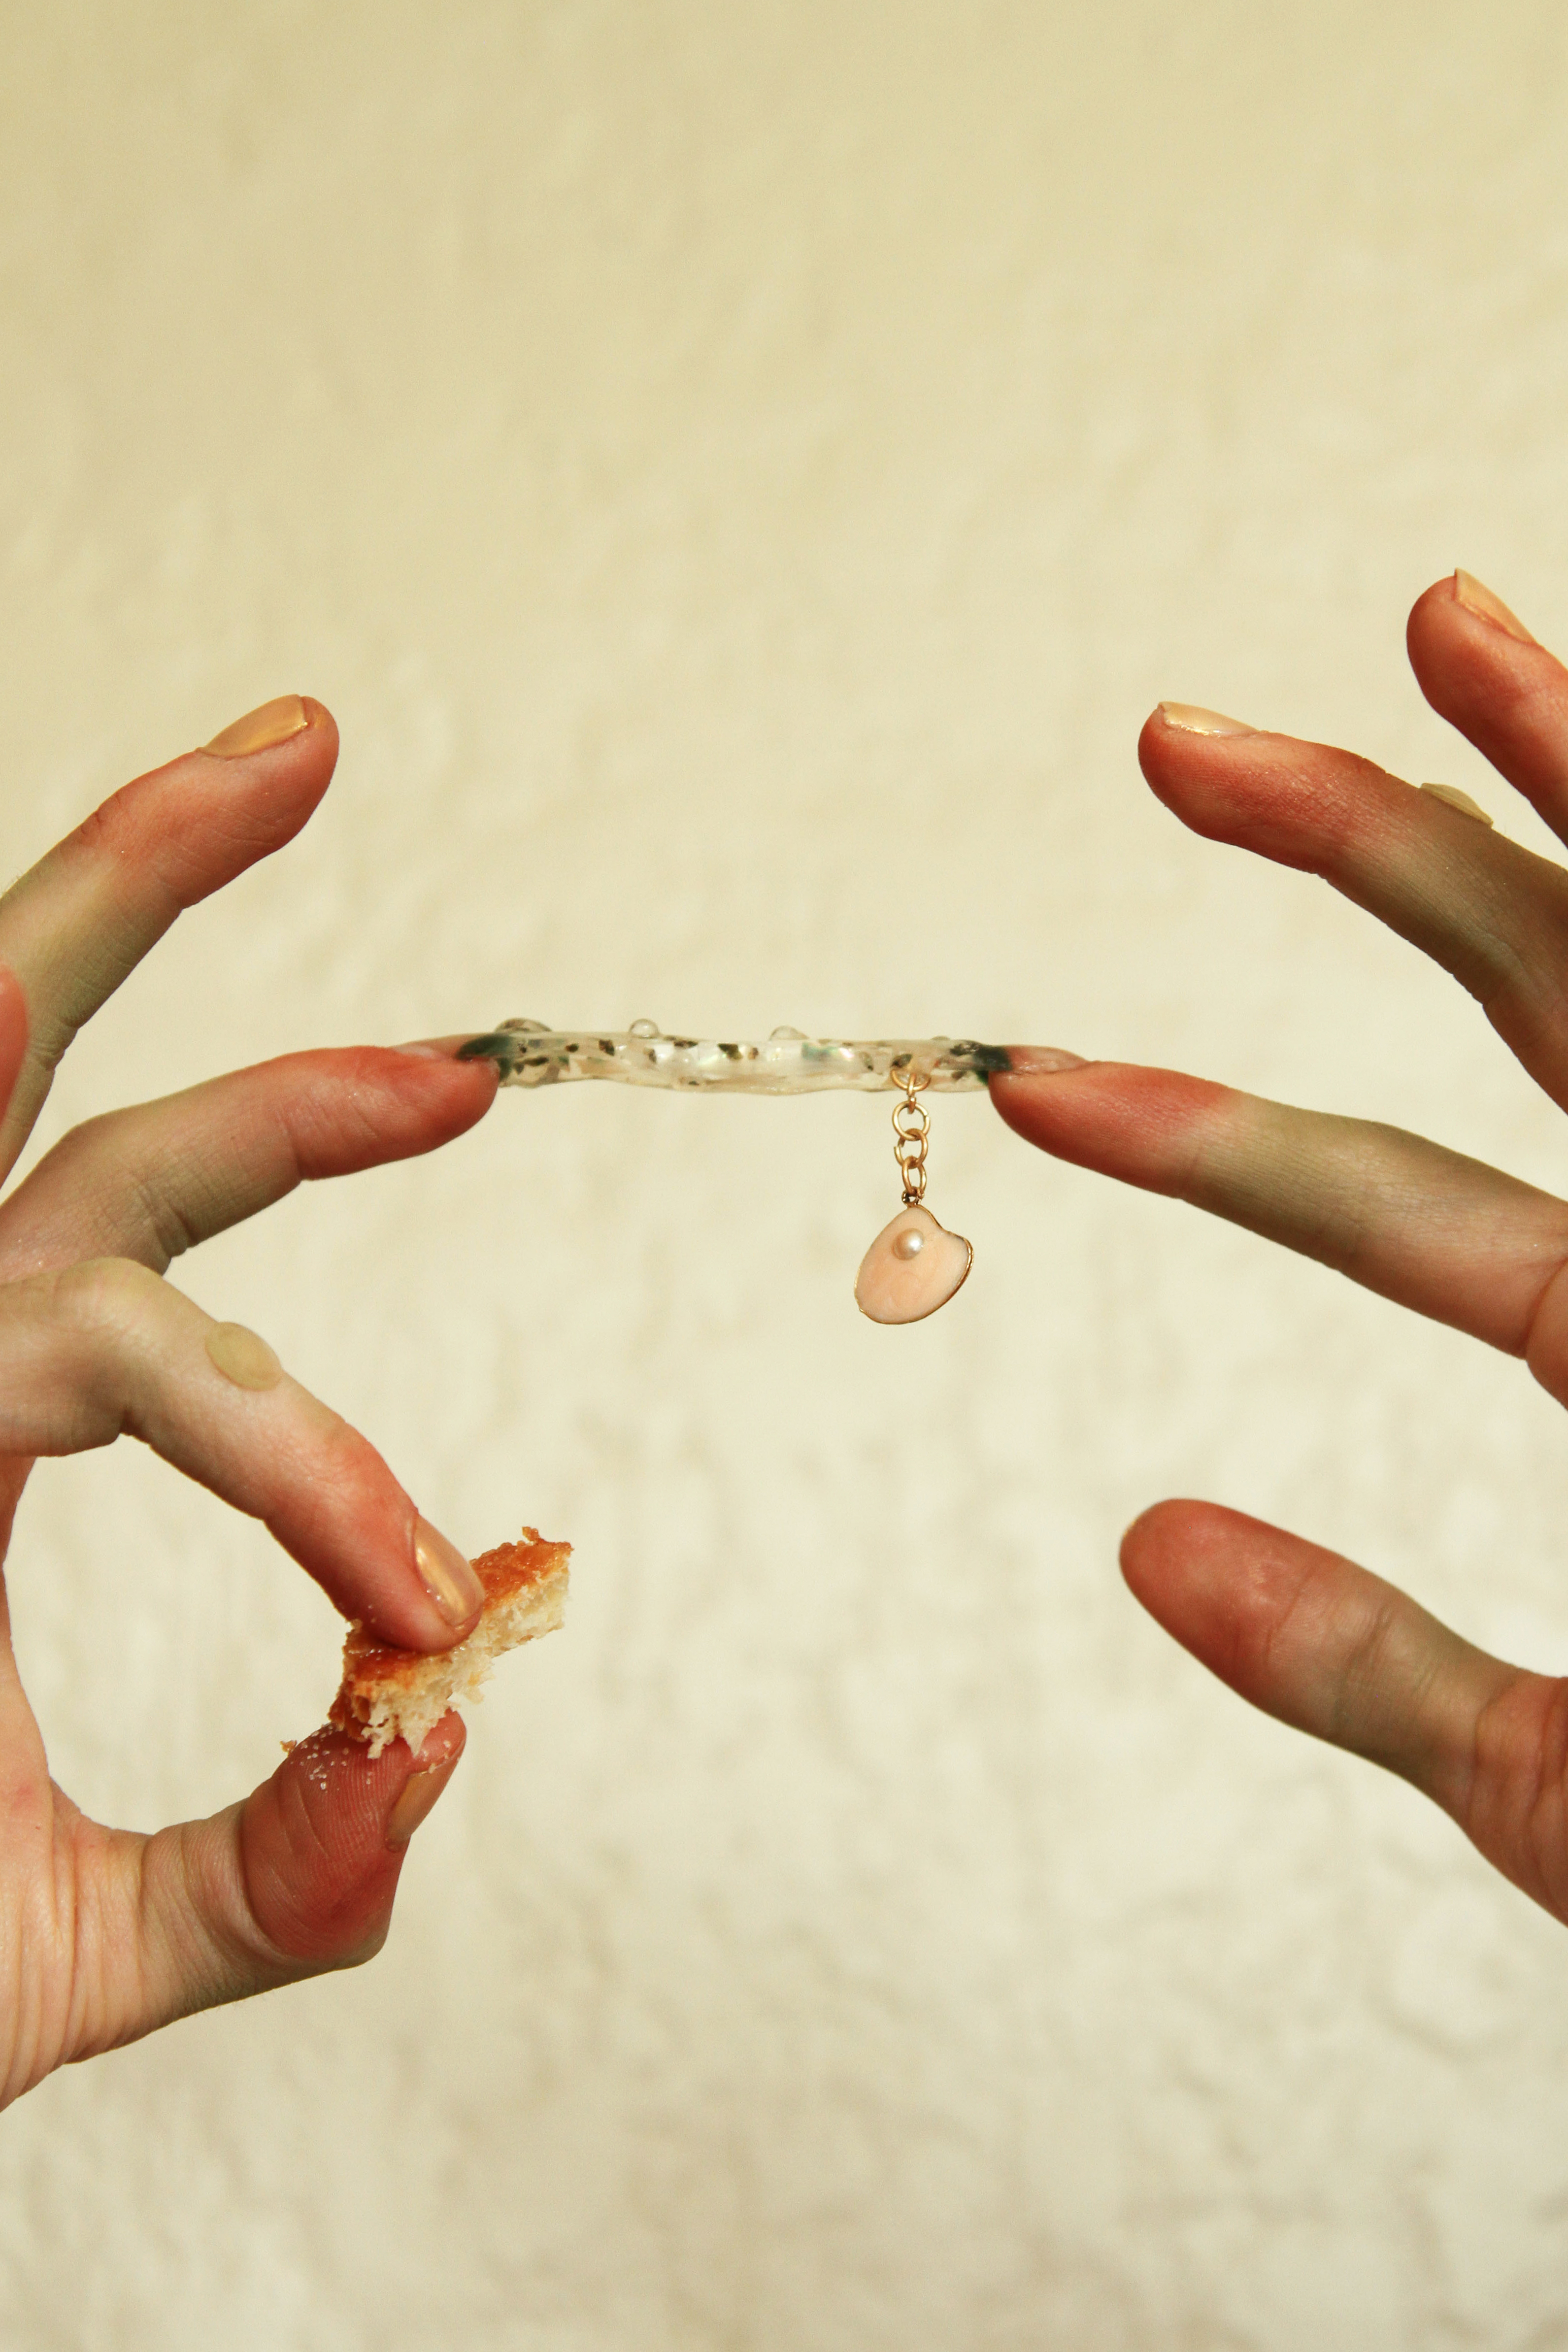 Two pointer fingers connected by a transparent nail sculpture full of tiny snails with the left hand carrying a biscuit